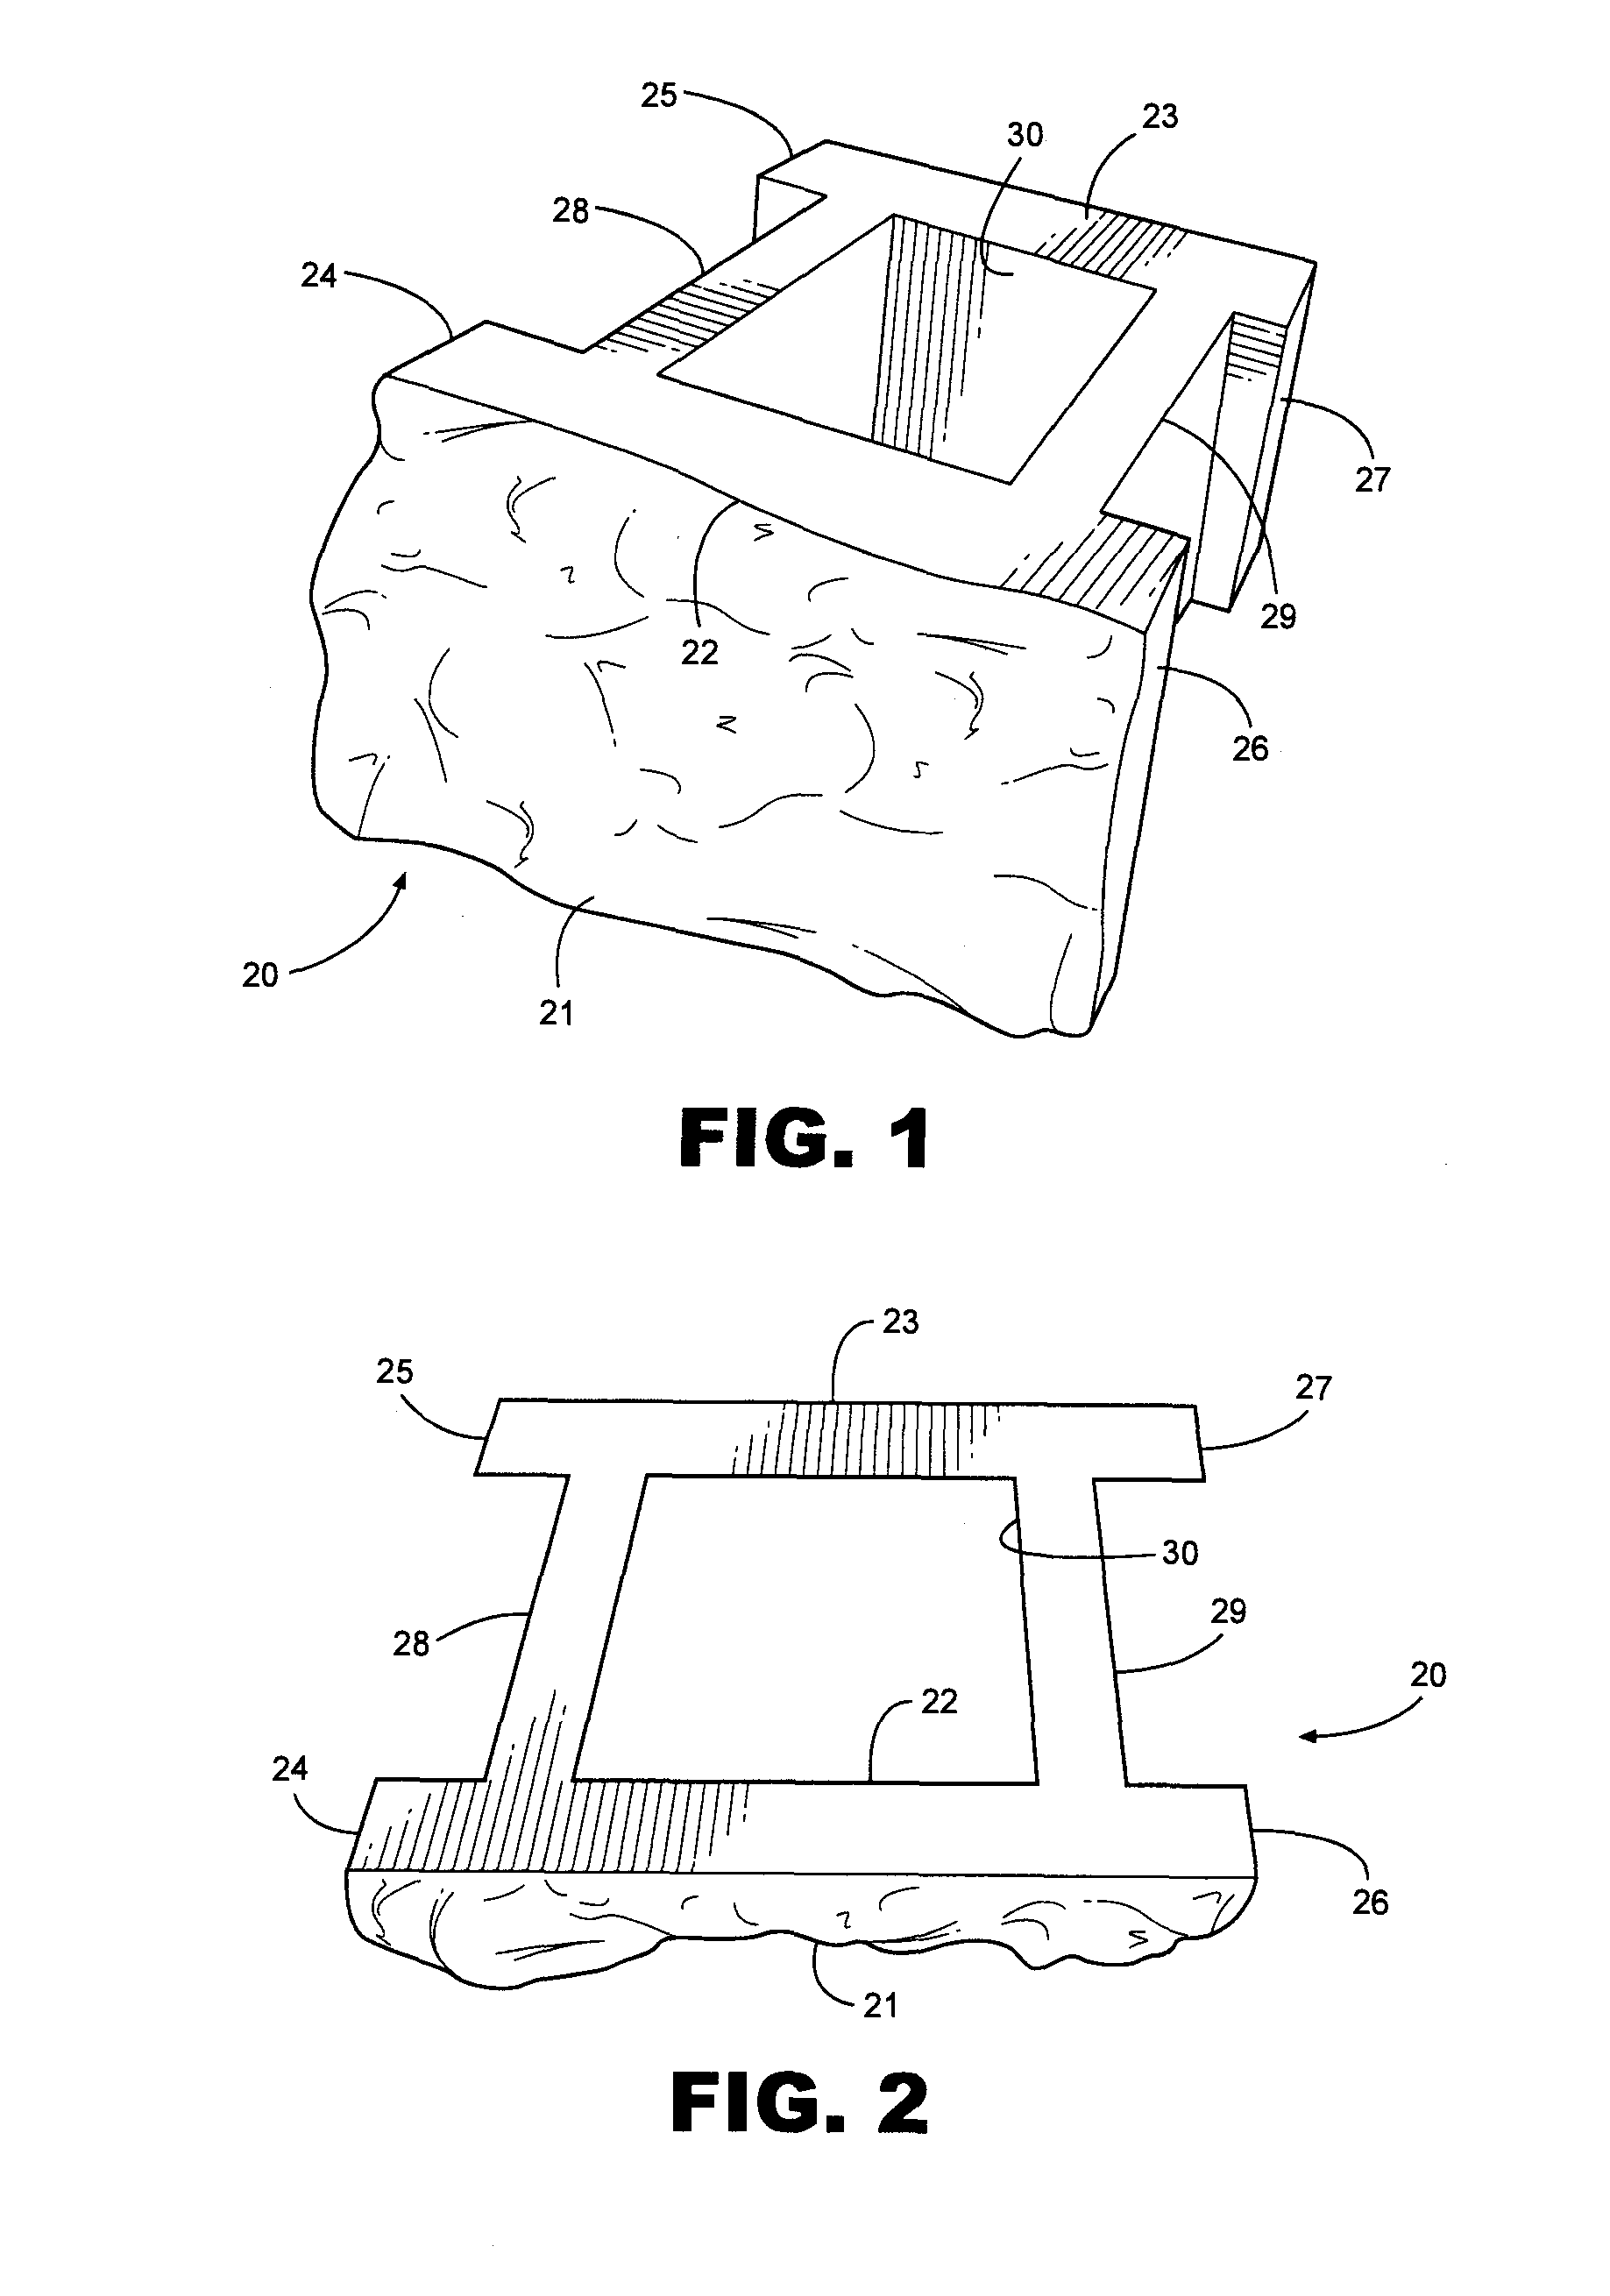 Method And Apparatus For Dry Casting Concrete Blocks Having A Decorative Face